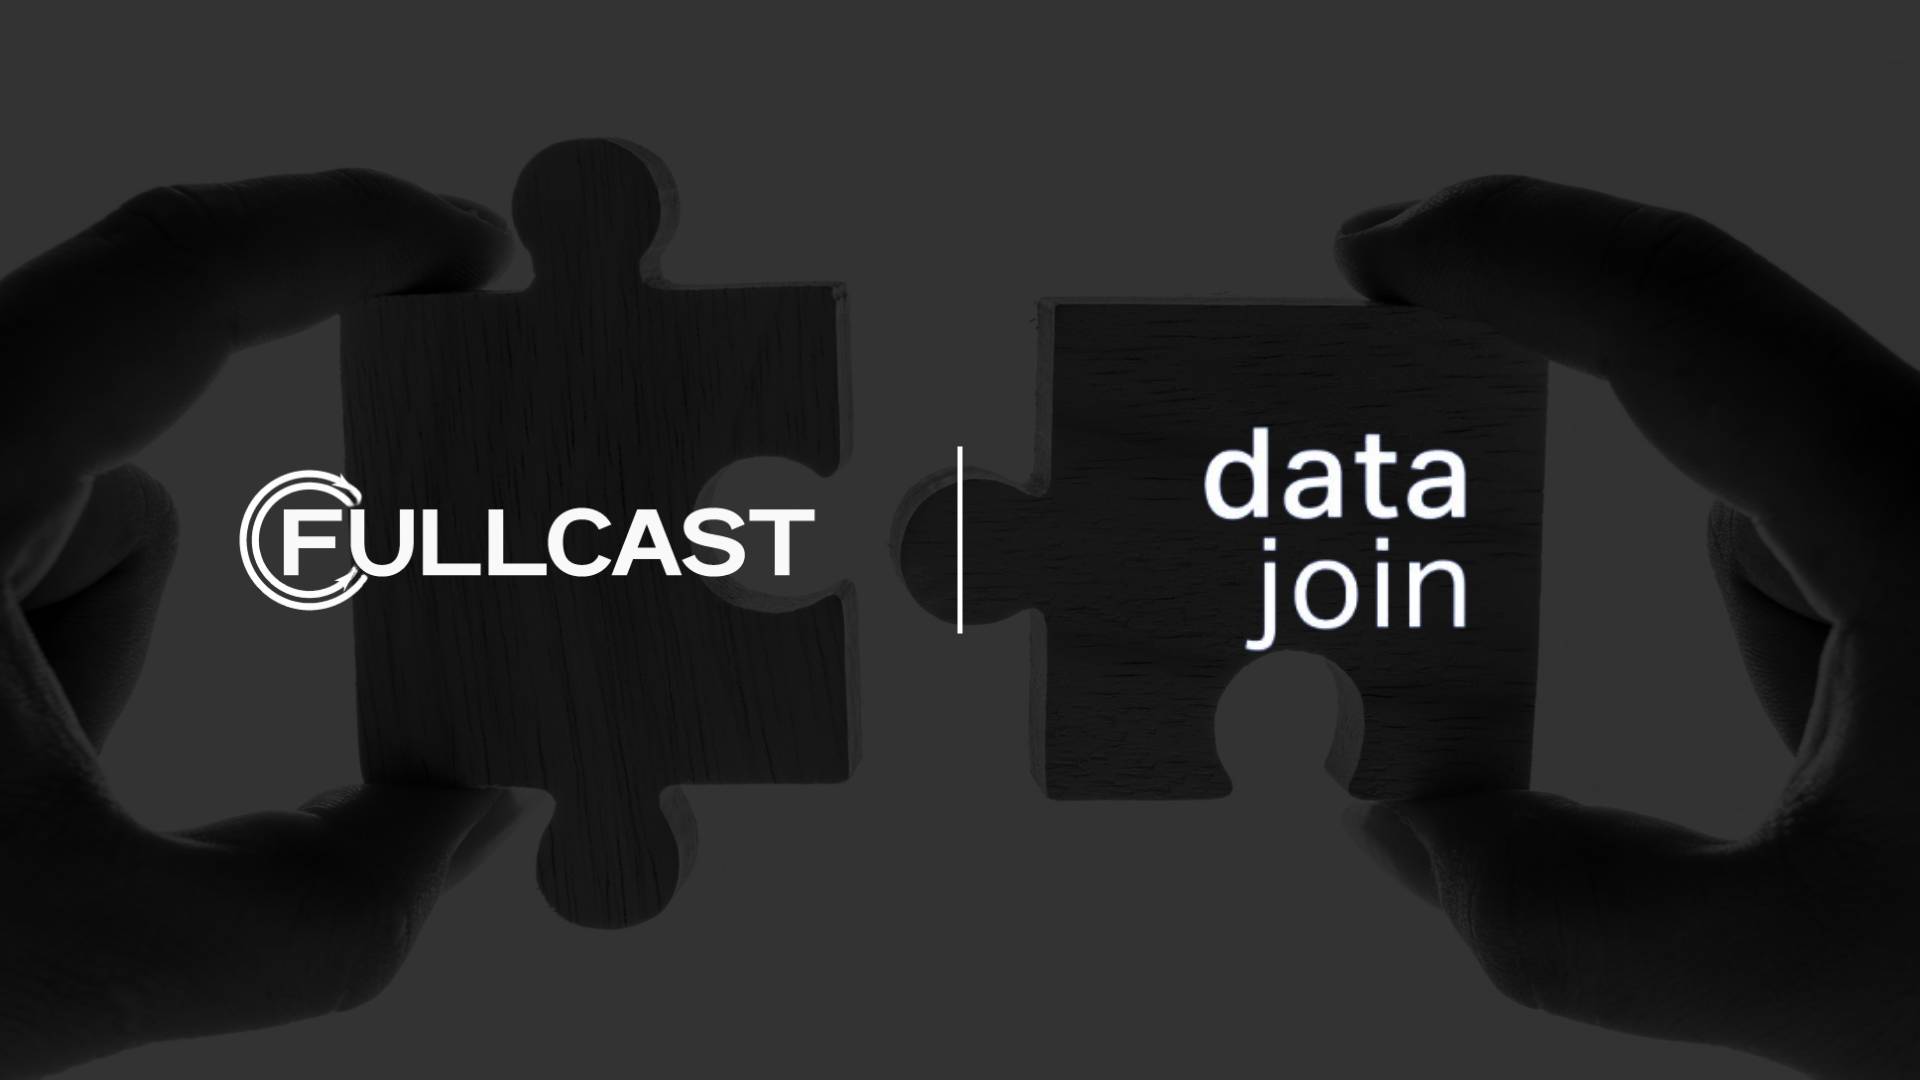 Fullcast Acquires Datajoin to Enhance Go-to-Market Analytics and Customer Journey Insights